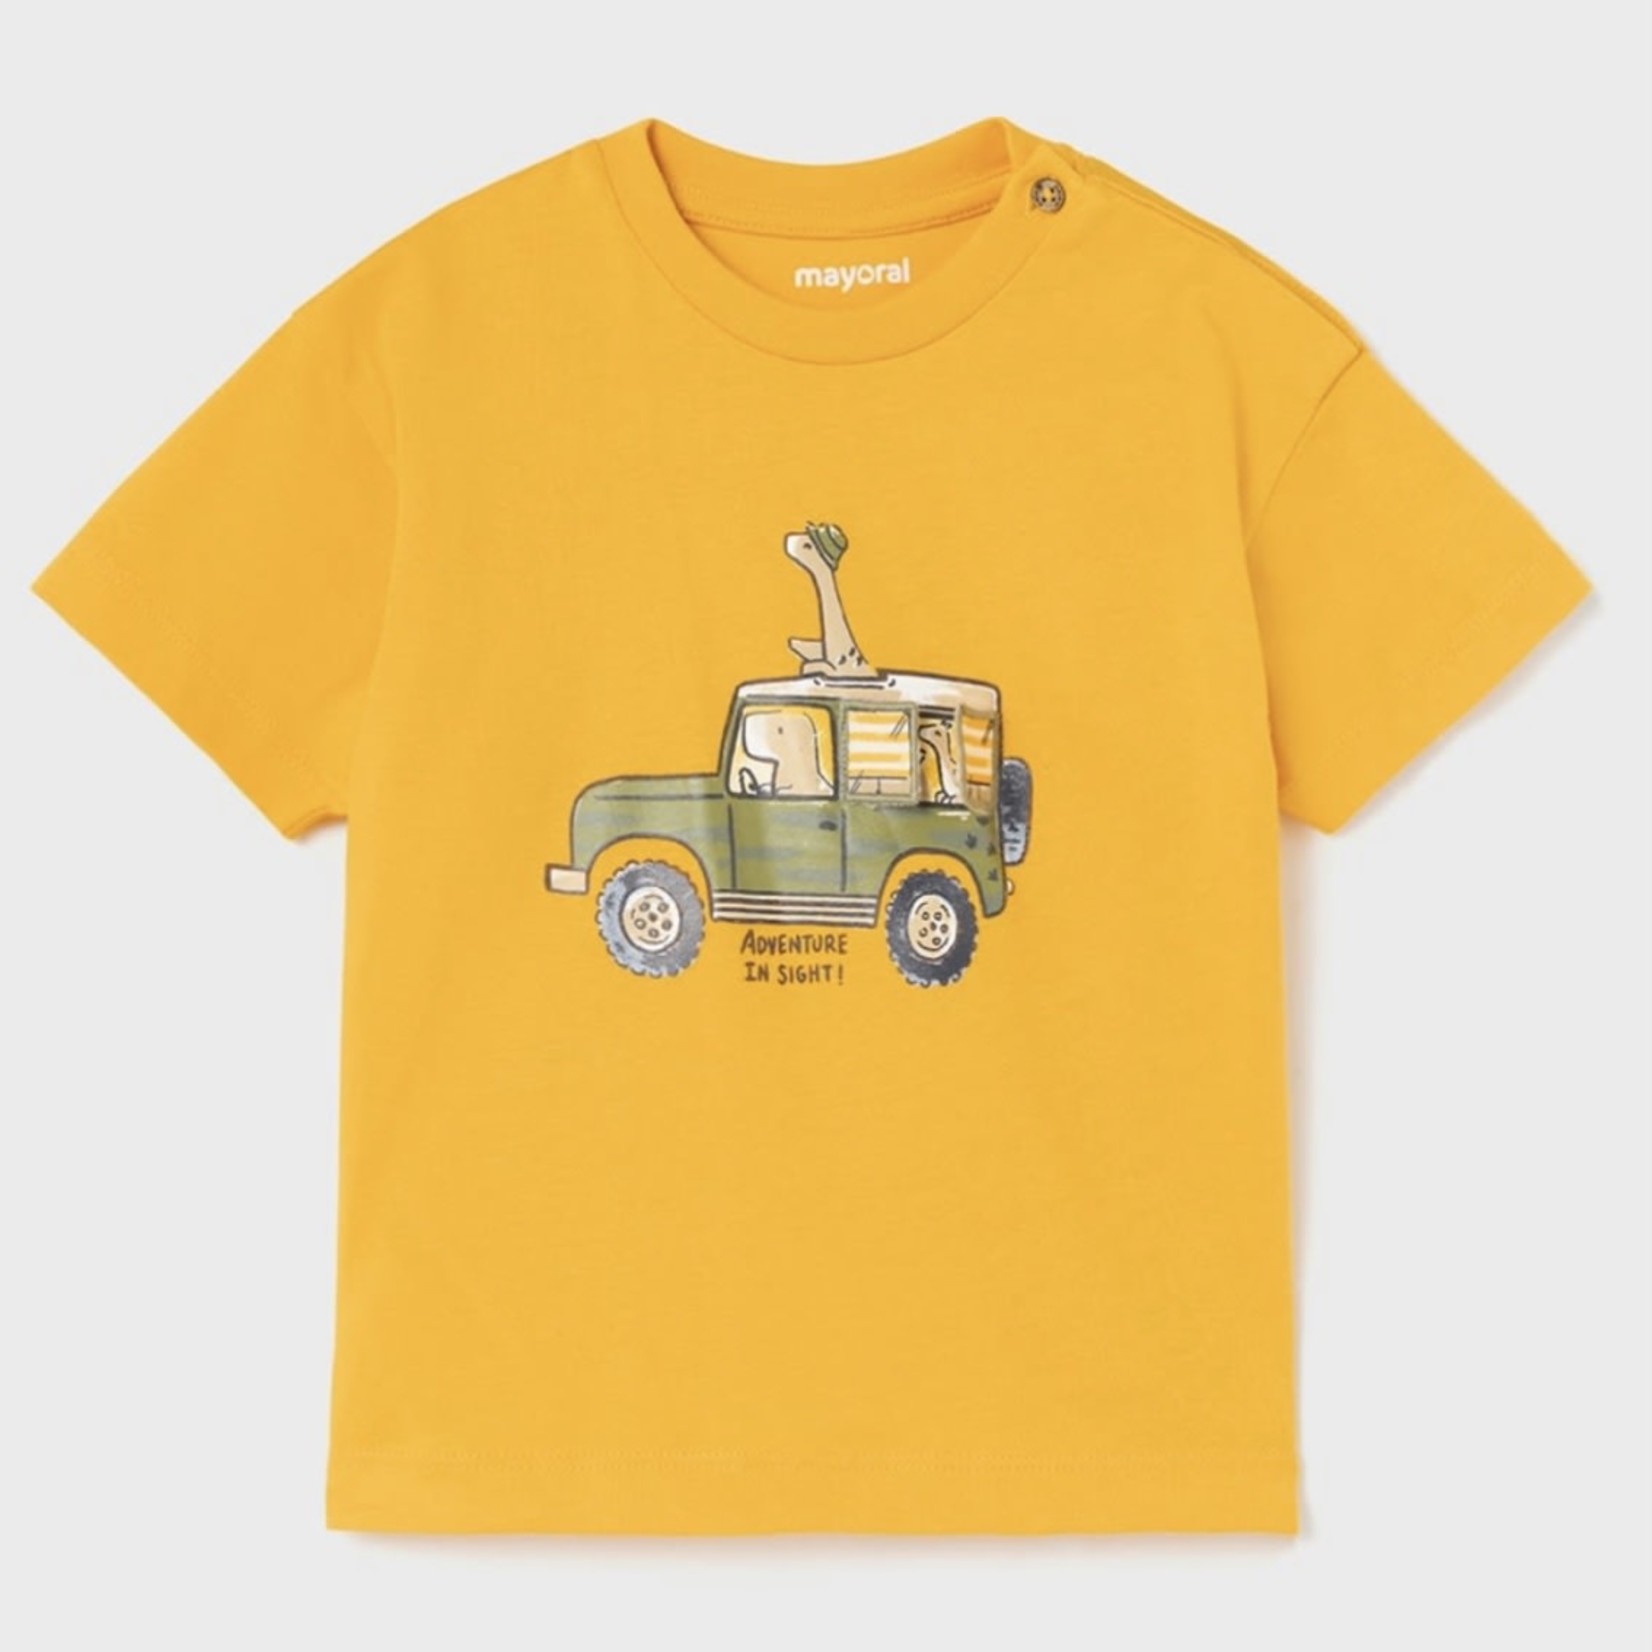 Mayoral Mayoral - Adventure In Sight Tee